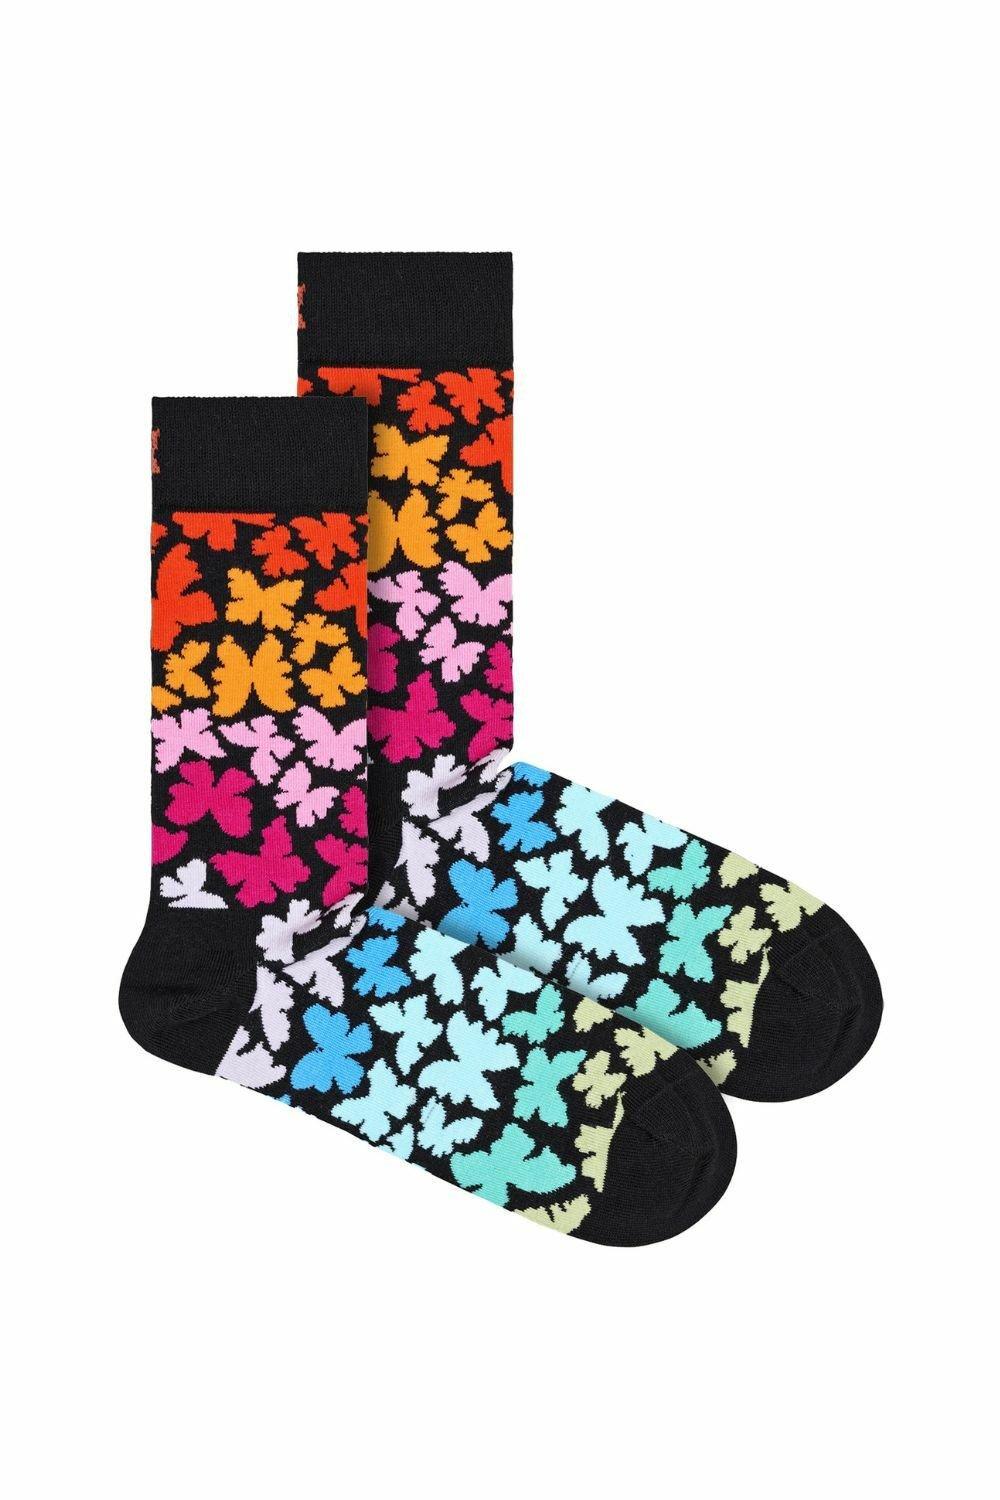 Novelty Butterfly Design Soft Breathable Cotton Socks - Great Gift